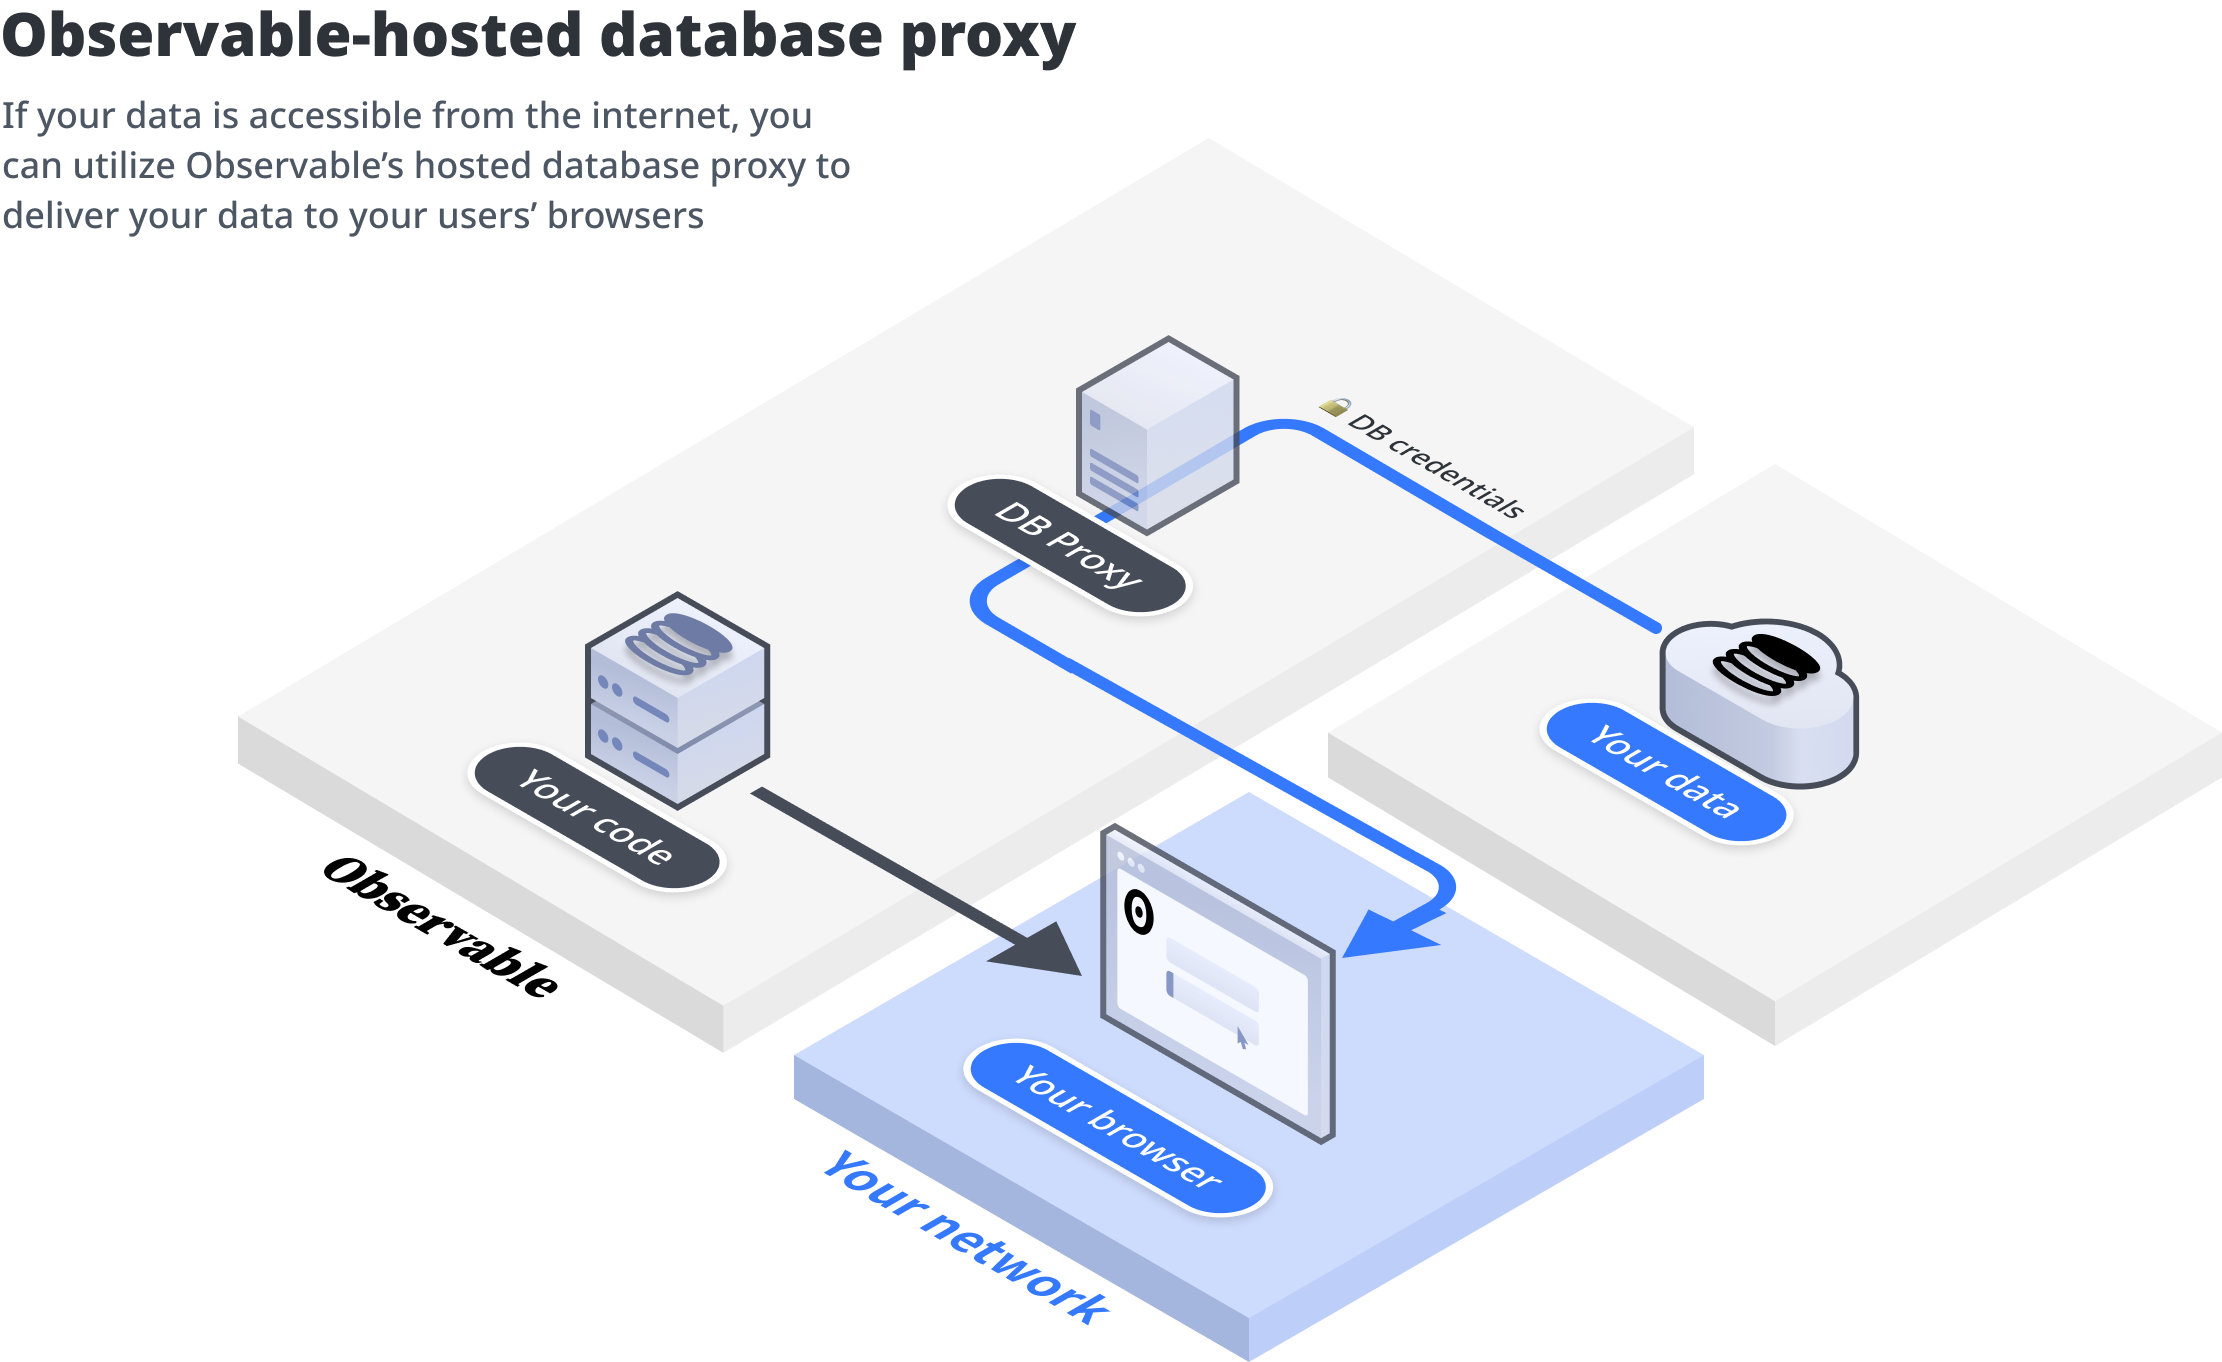 Diagram of the data flow when using the Observable-hosted database proxy. Notebooks are served from Observable's servers, data flows through Observable's infrastructure.